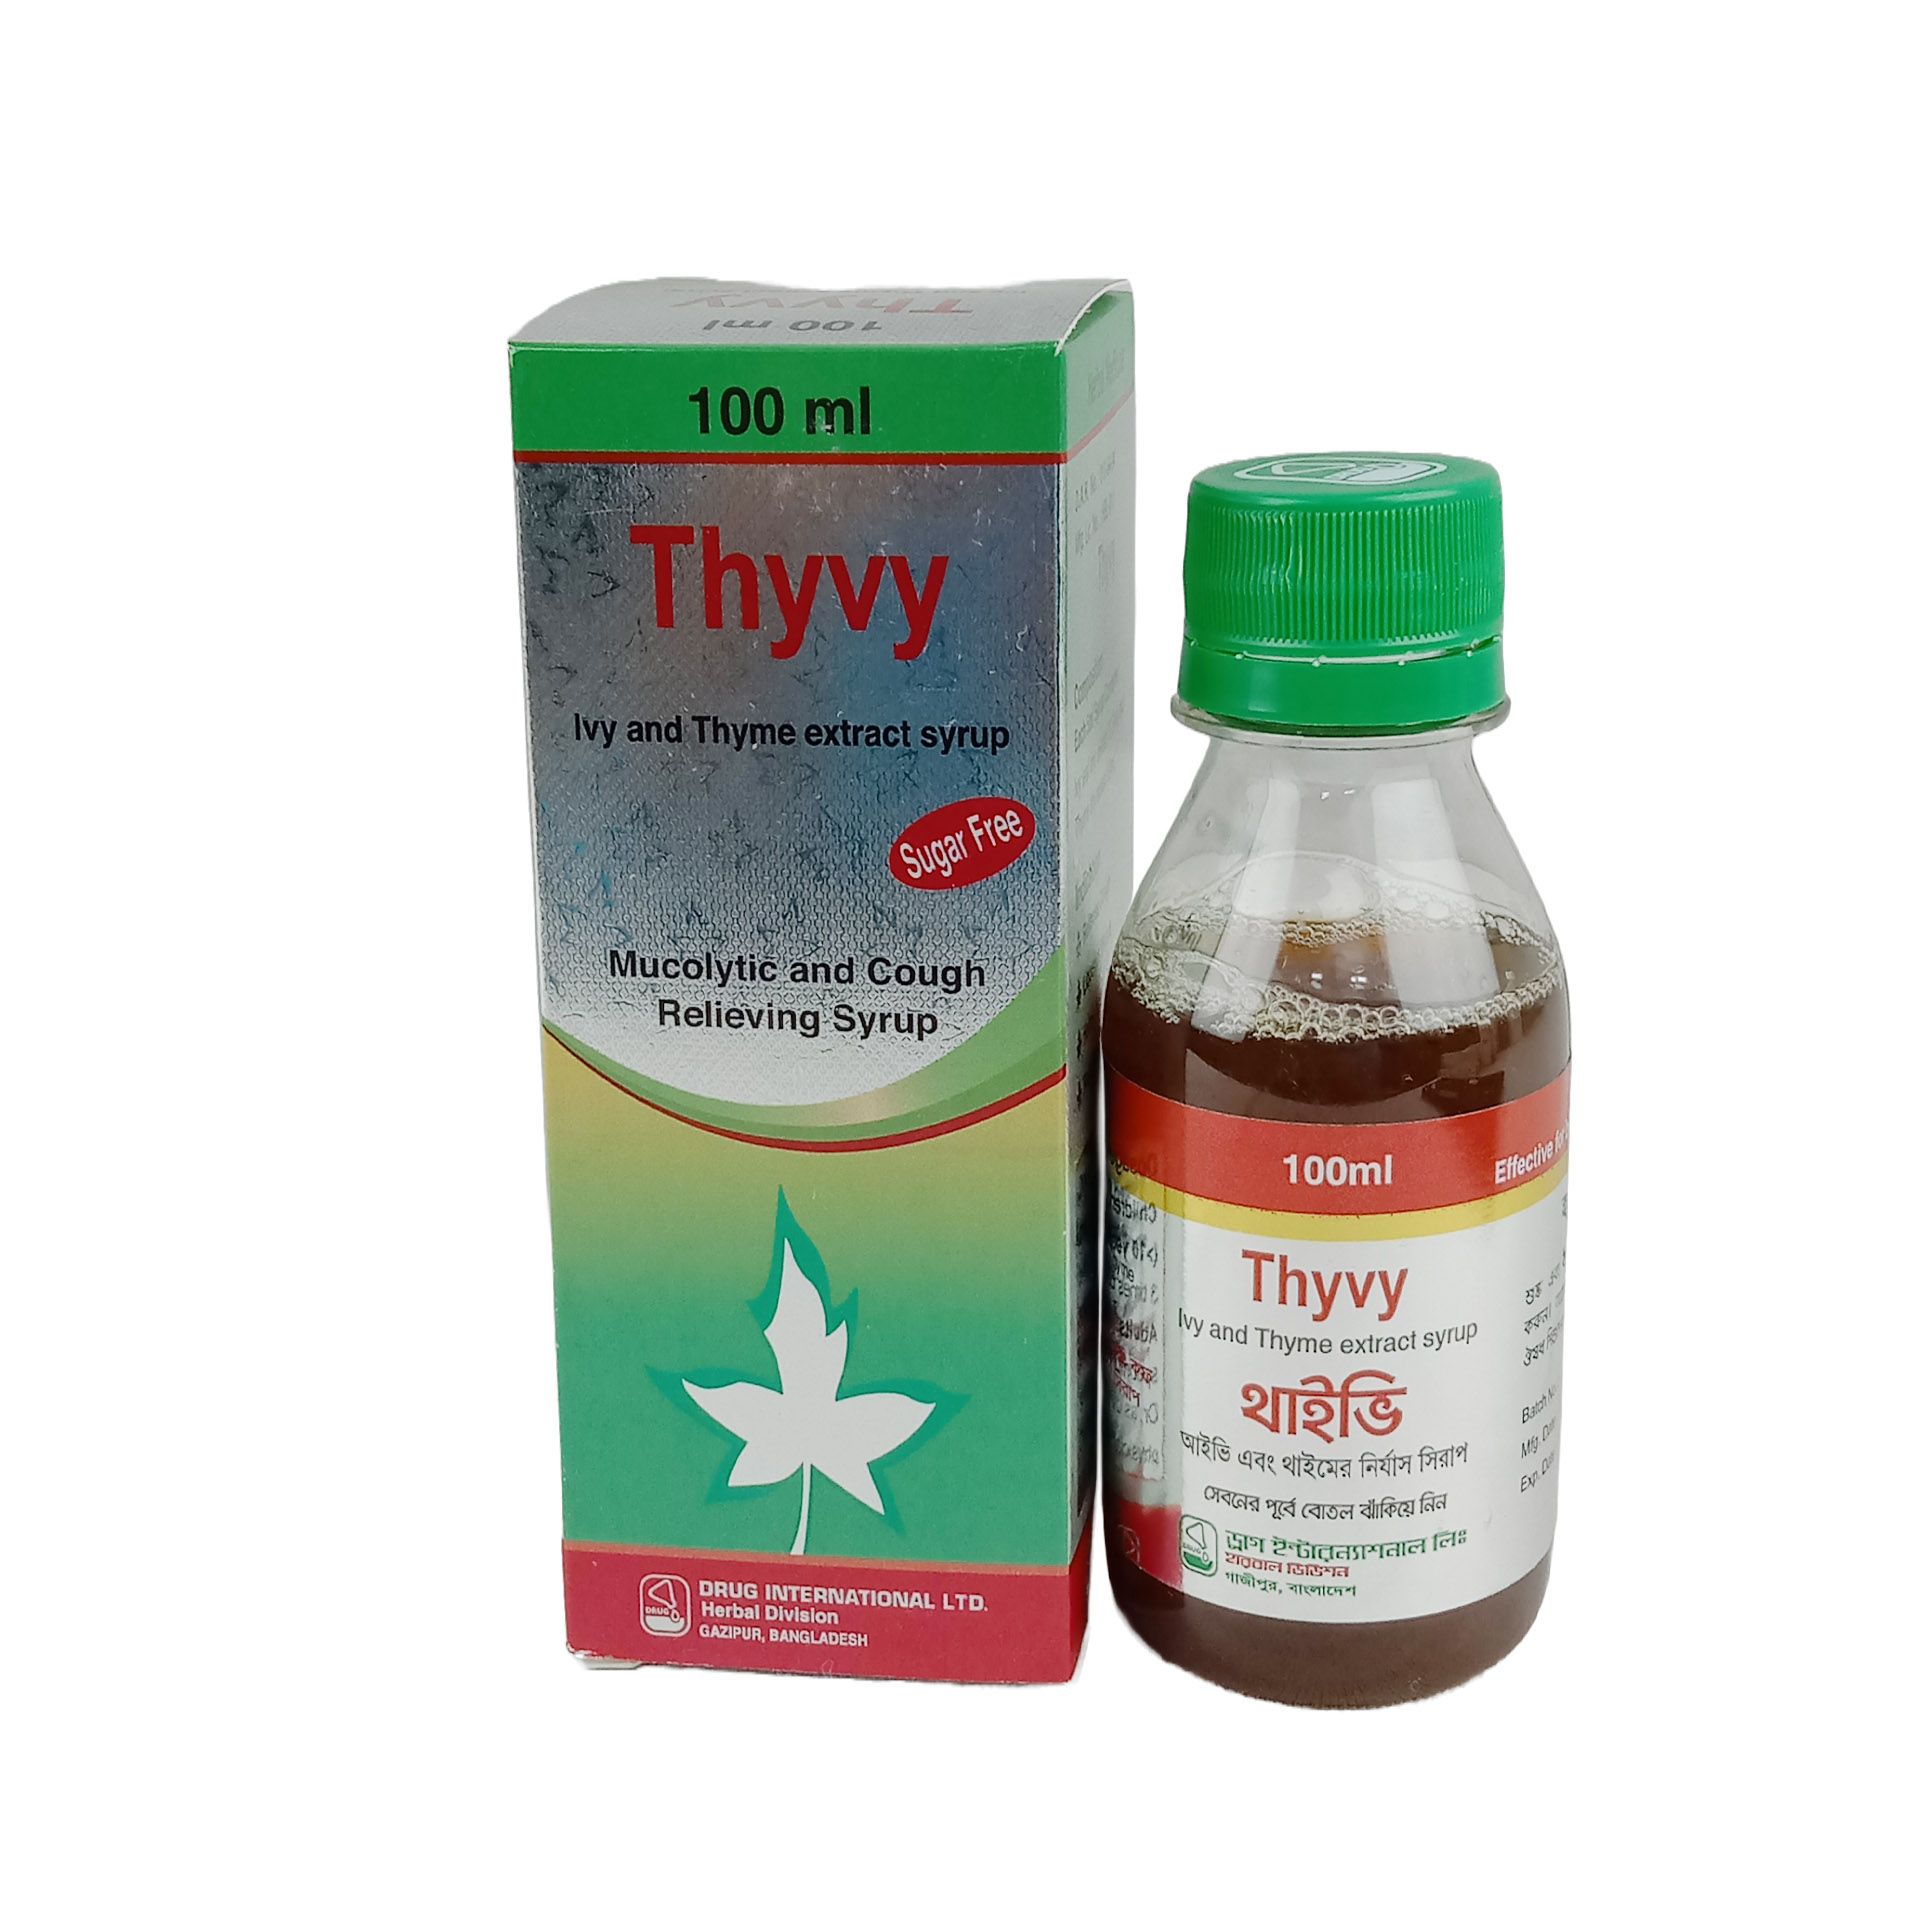 Thyvy 100ml Syrup